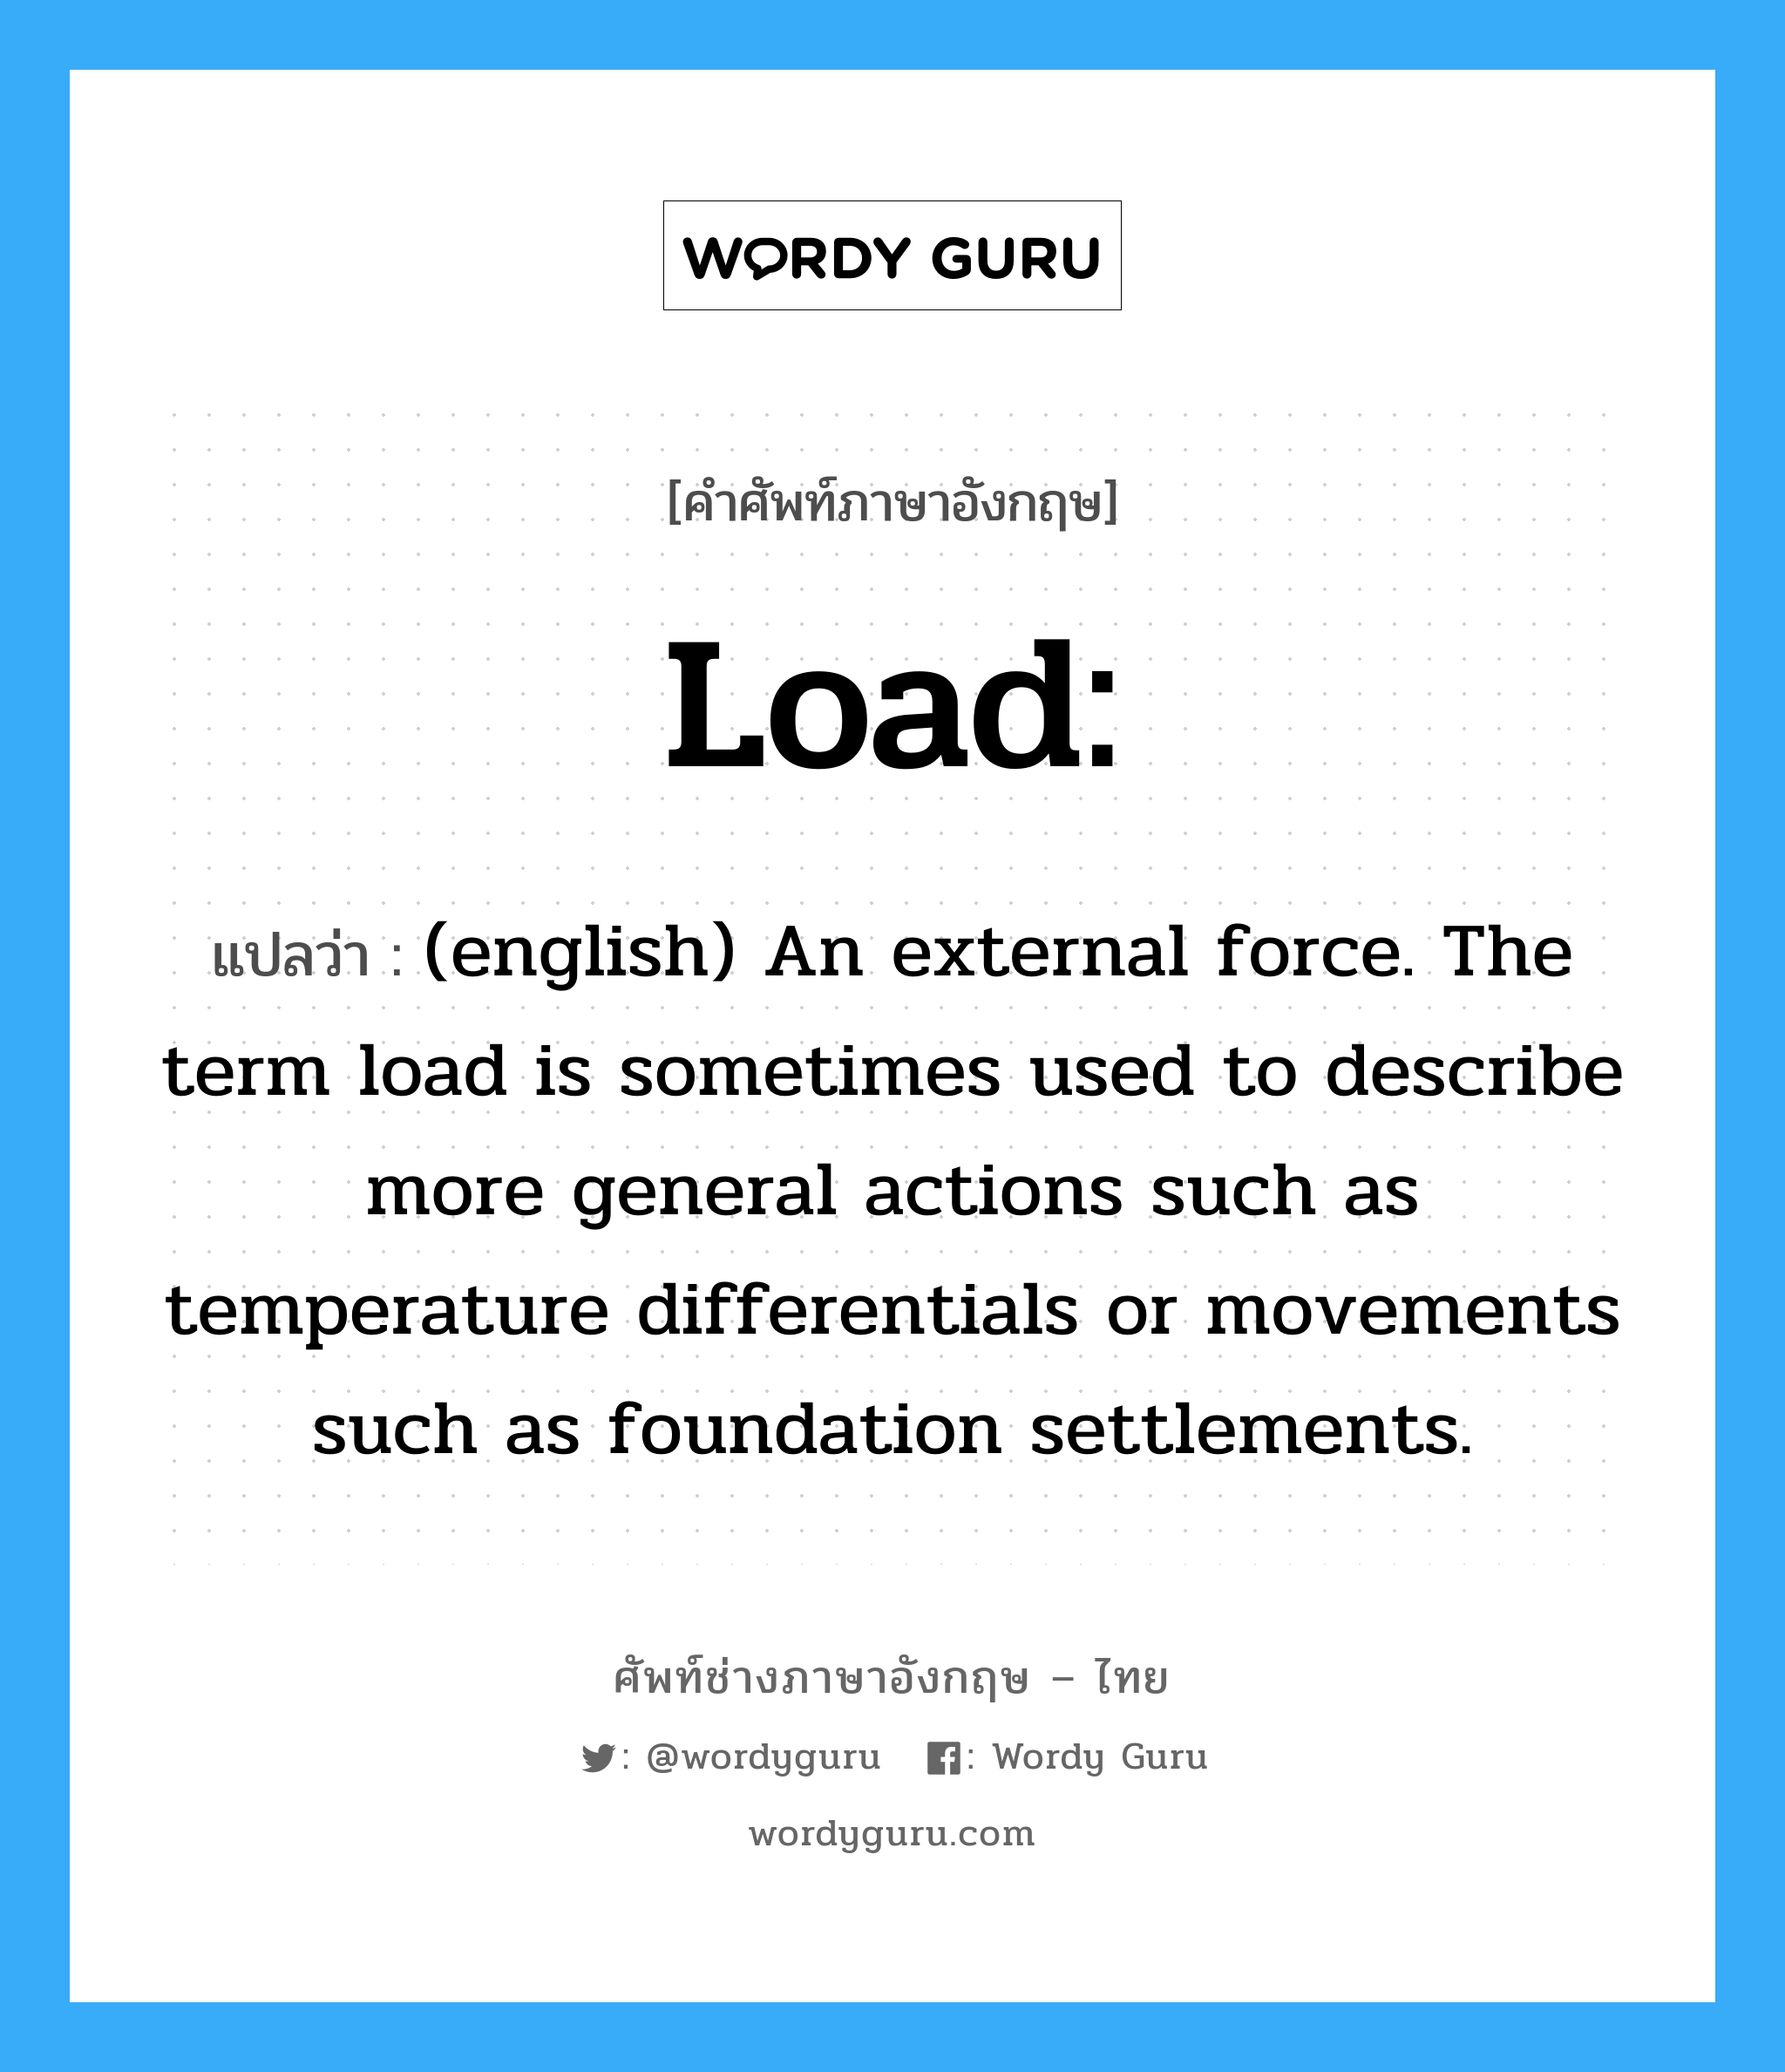 (english) An external force. The term load is sometimes used to describe more general actions such as temperature differentials or movements such as foundation settlements. ภาษาอังกฤษ?, คำศัพท์ช่างภาษาอังกฤษ - ไทย (english) An external force. The term load is sometimes used to describe more general actions such as temperature differentials or movements such as foundation settlements. คำศัพท์ภาษาอังกฤษ (english) An external force. The term load is sometimes used to describe more general actions such as temperature differentials or movements such as foundation settlements. แปลว่า Load: